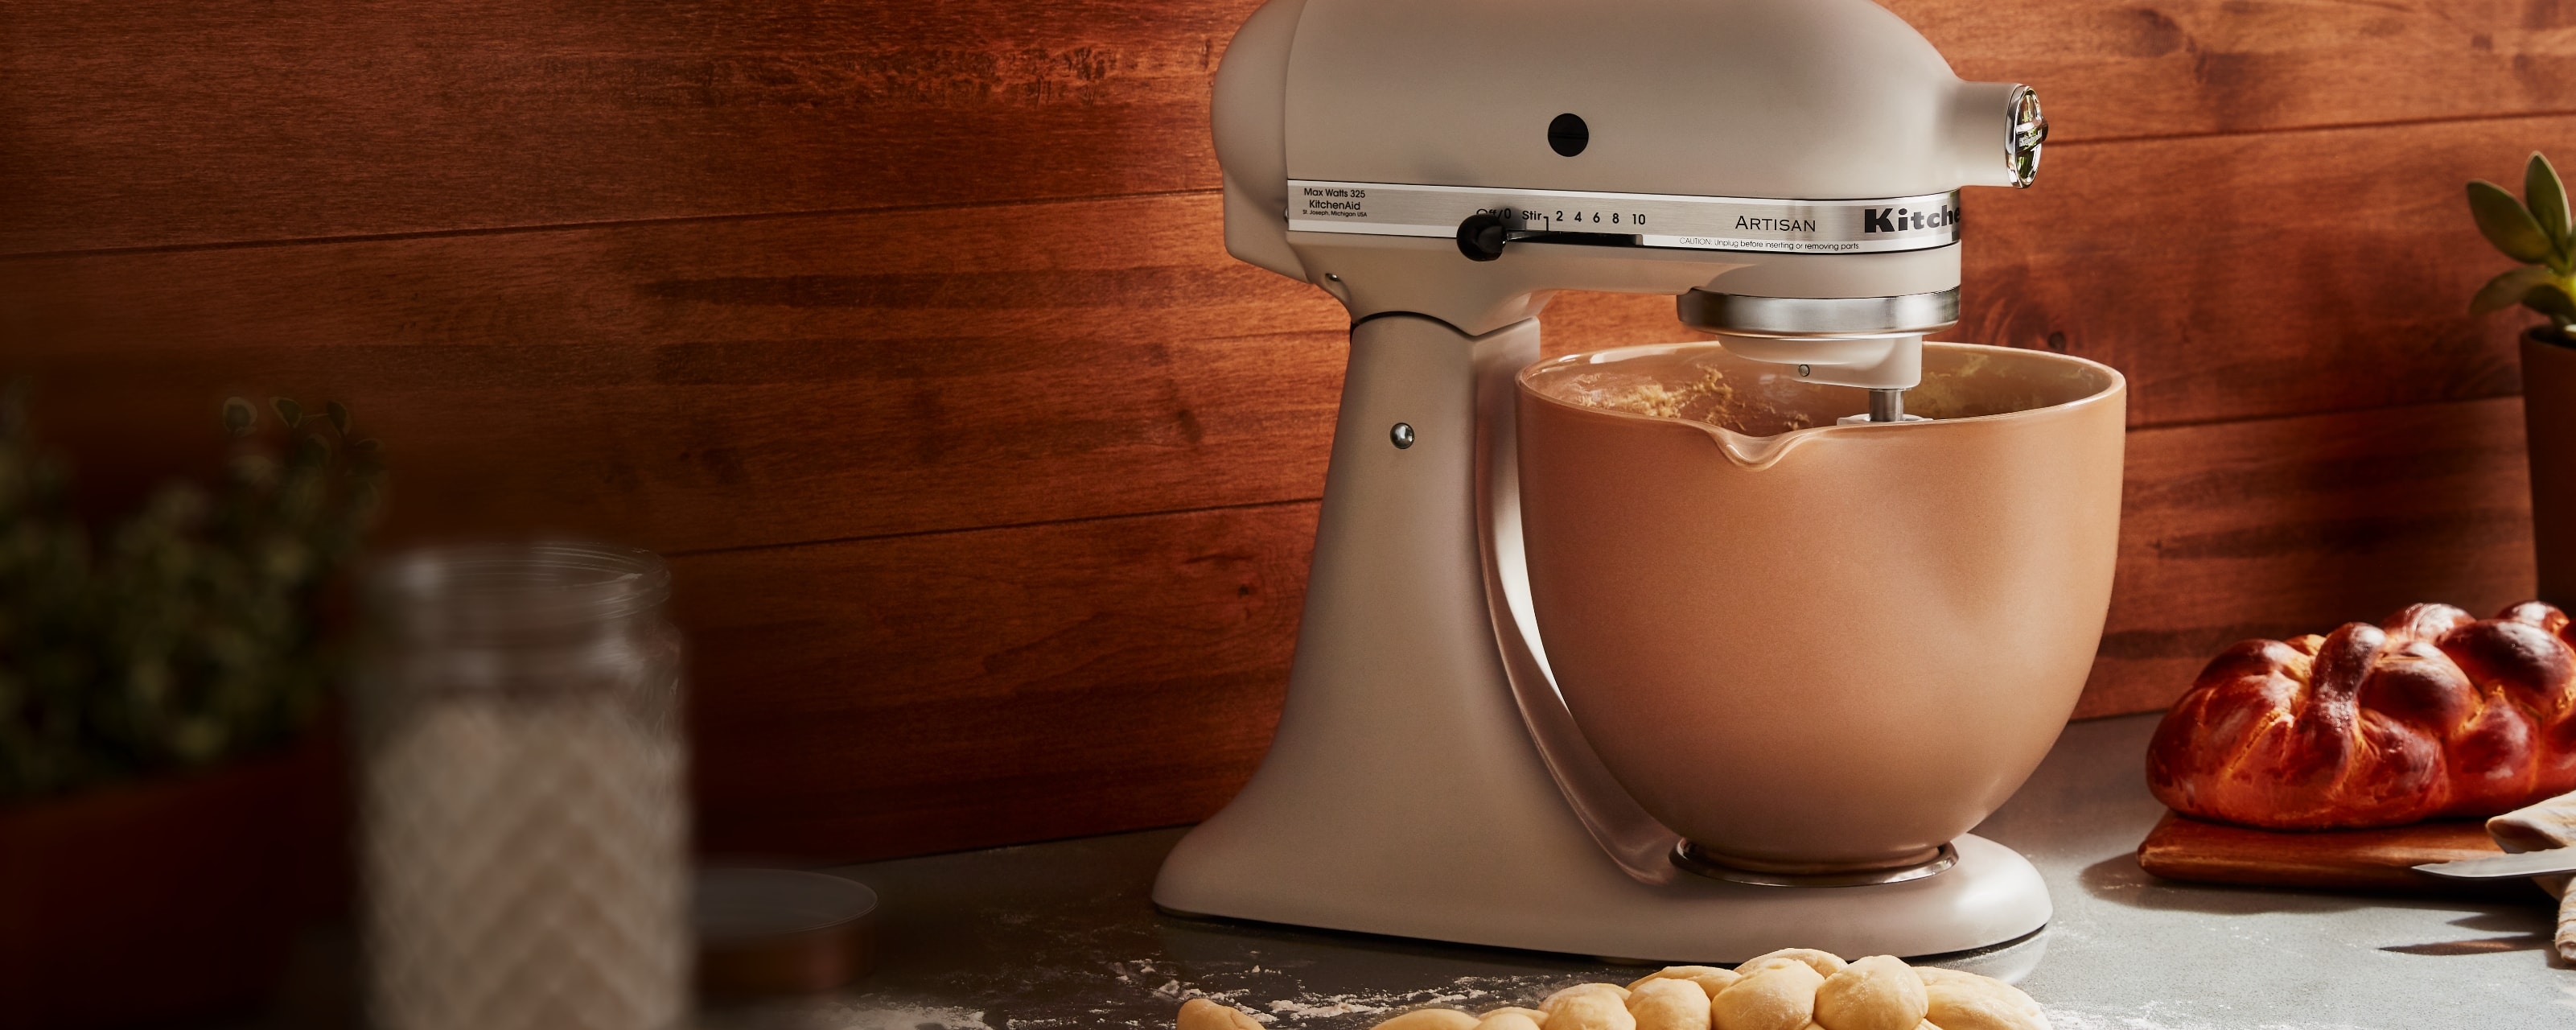 Cream stand mixer with ceramic mixing bowl